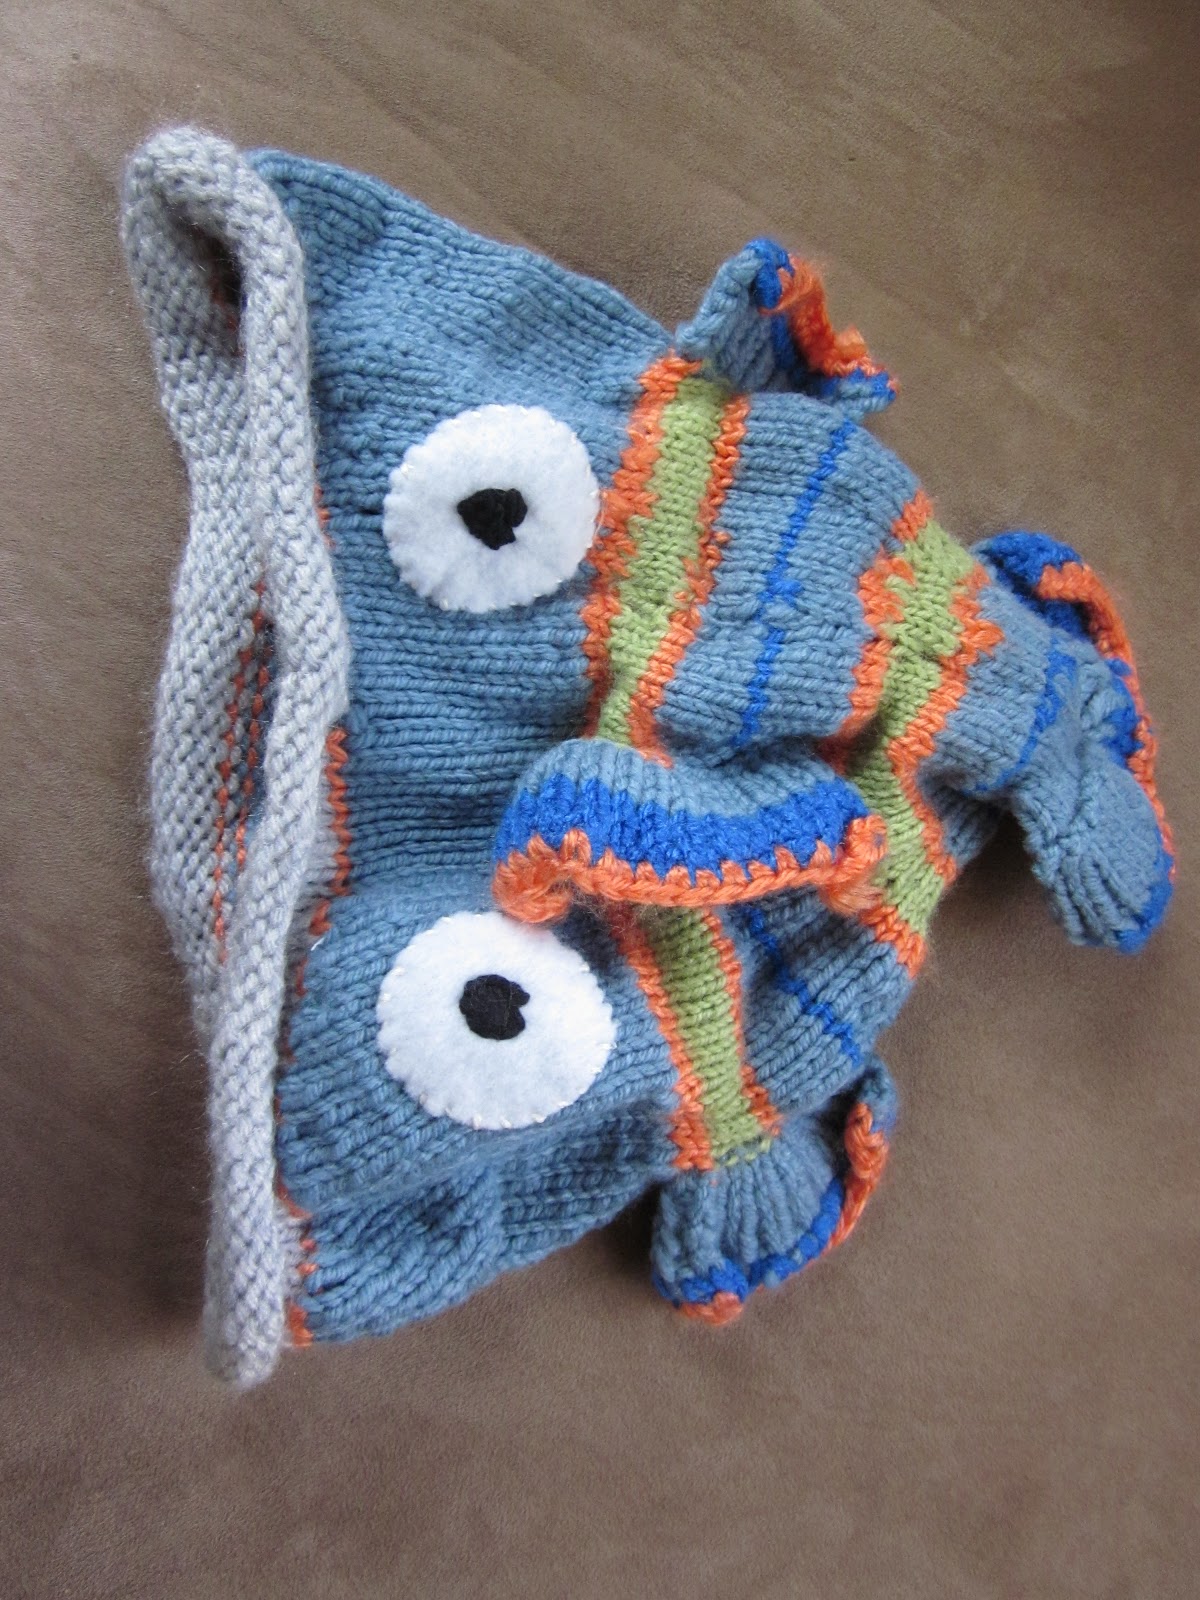 I make stuff: Fish Hat (Dead or Alive) from Knitty.com